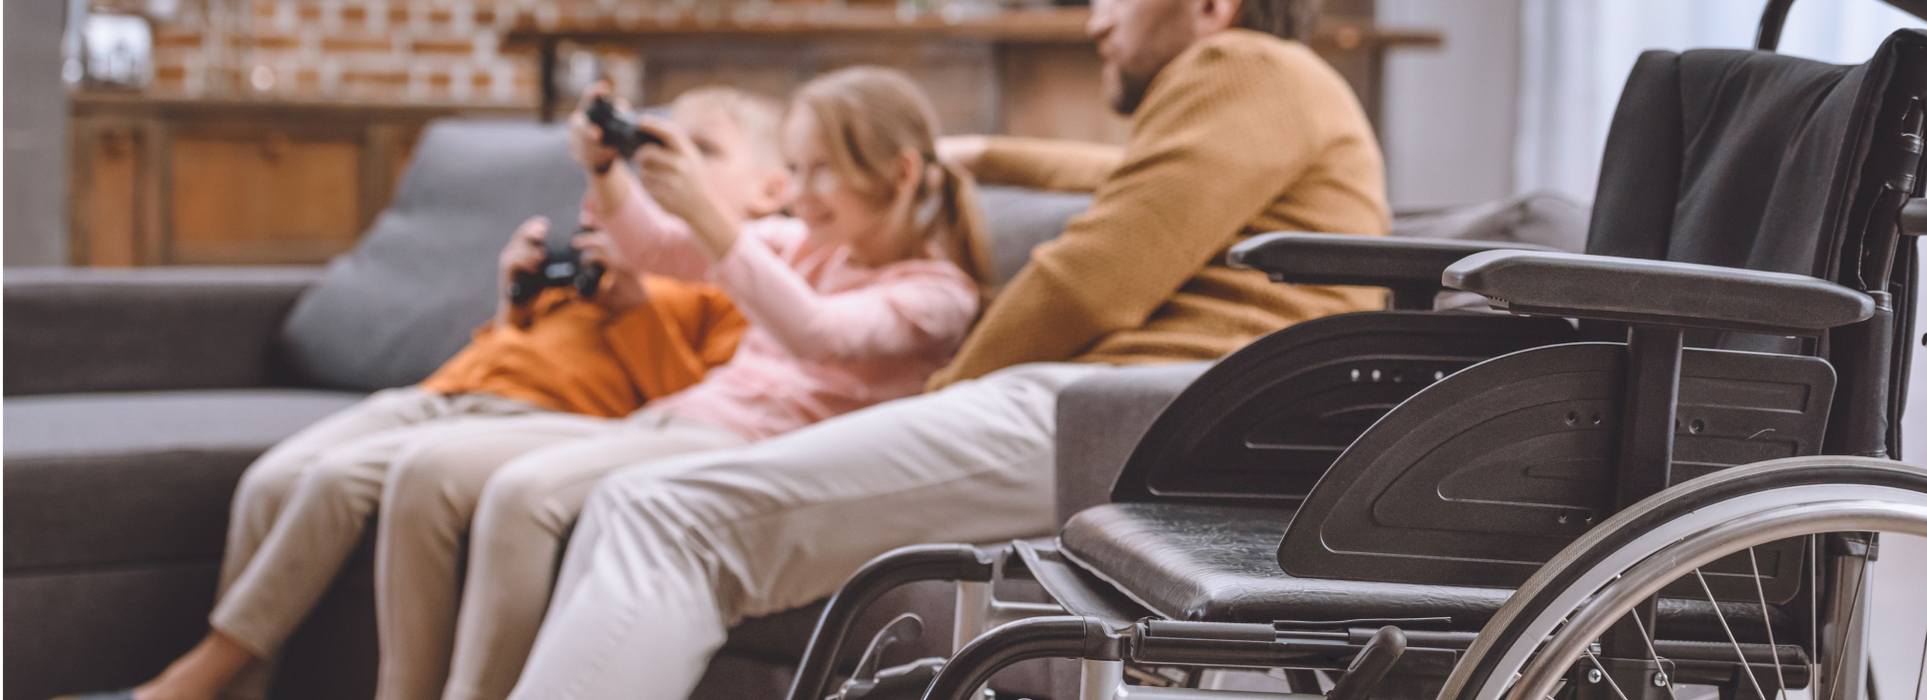 Enhancing Safety: Smart Solutions for Disabled Individuals